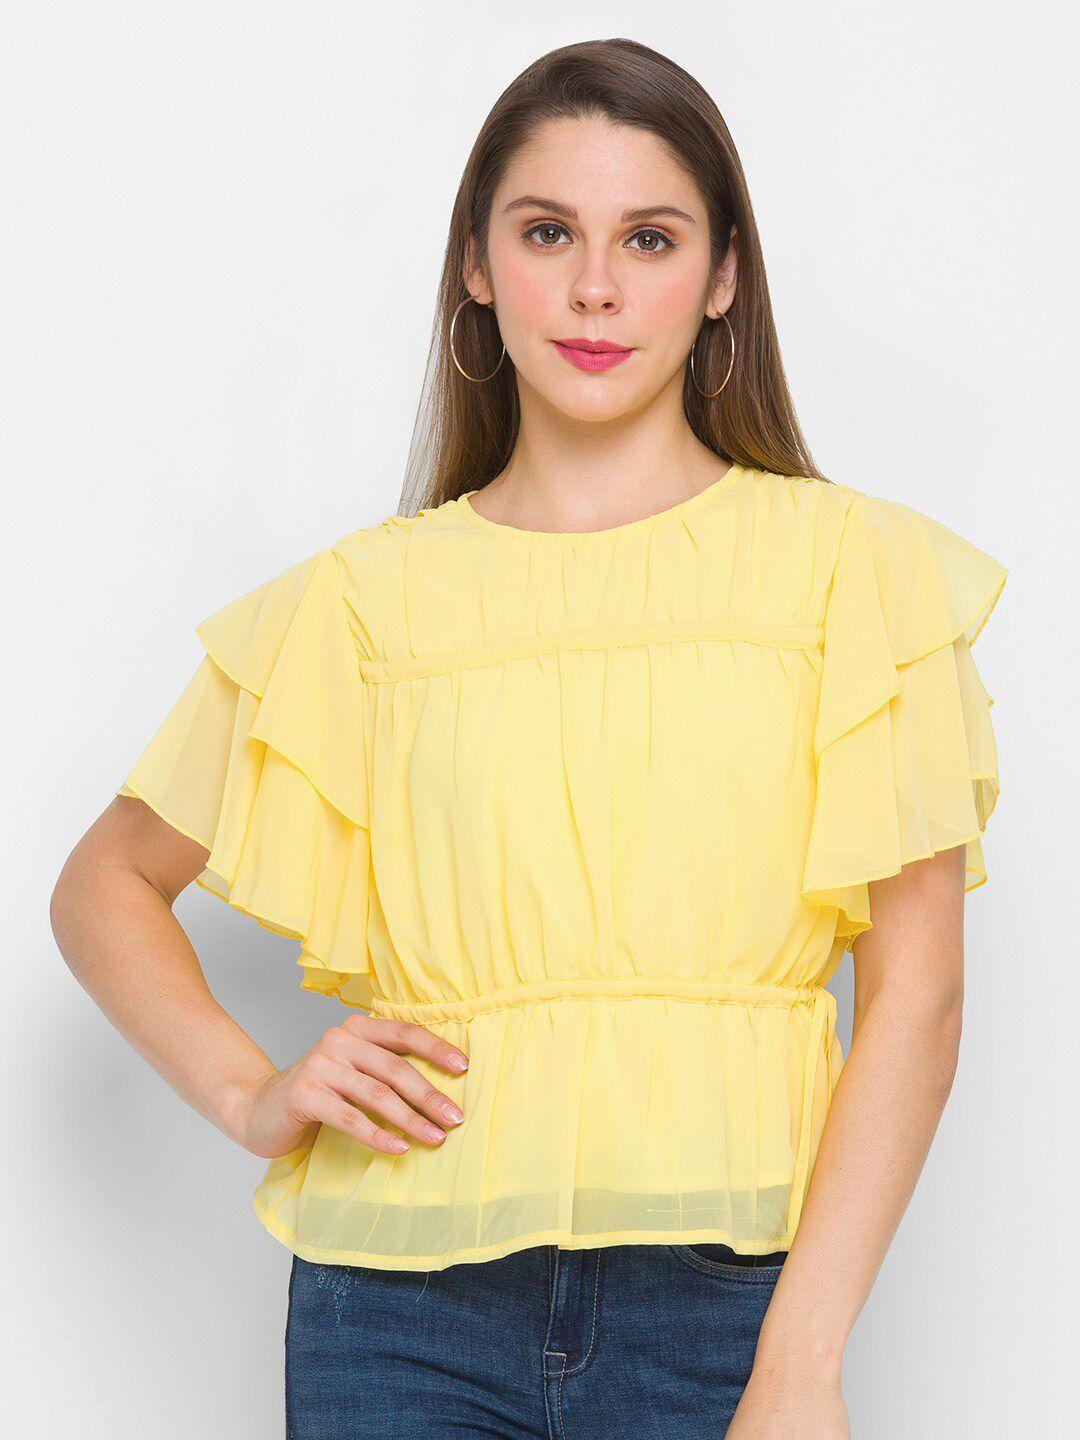 Globus Yellow Georgette Cinched Waist Top